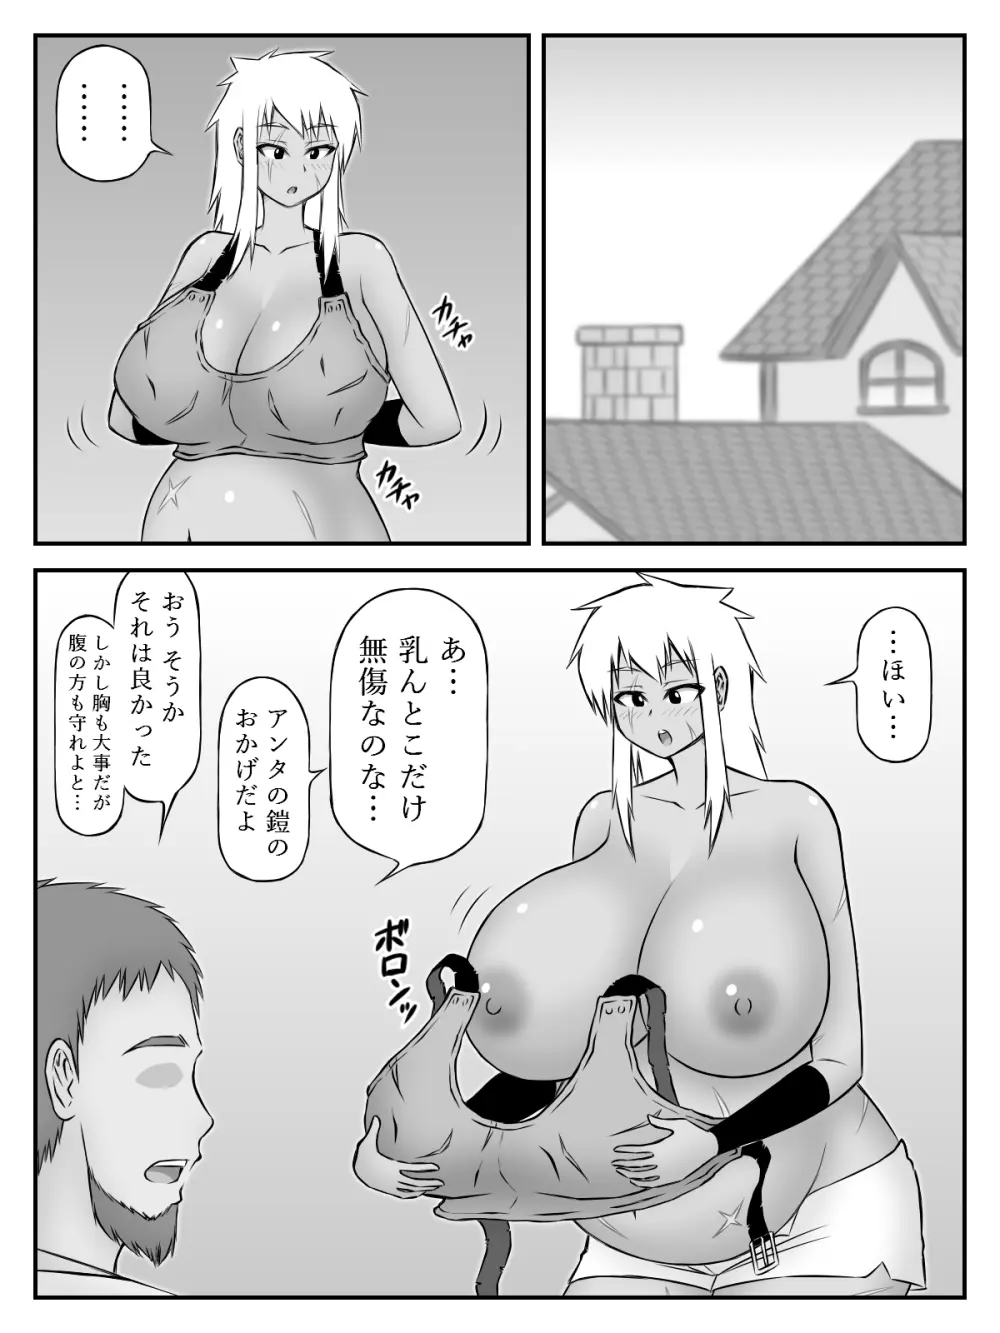 [SiD - Sato in Dreams -] 爆乳(おっぱい)と胸甲(アーマー) - page22